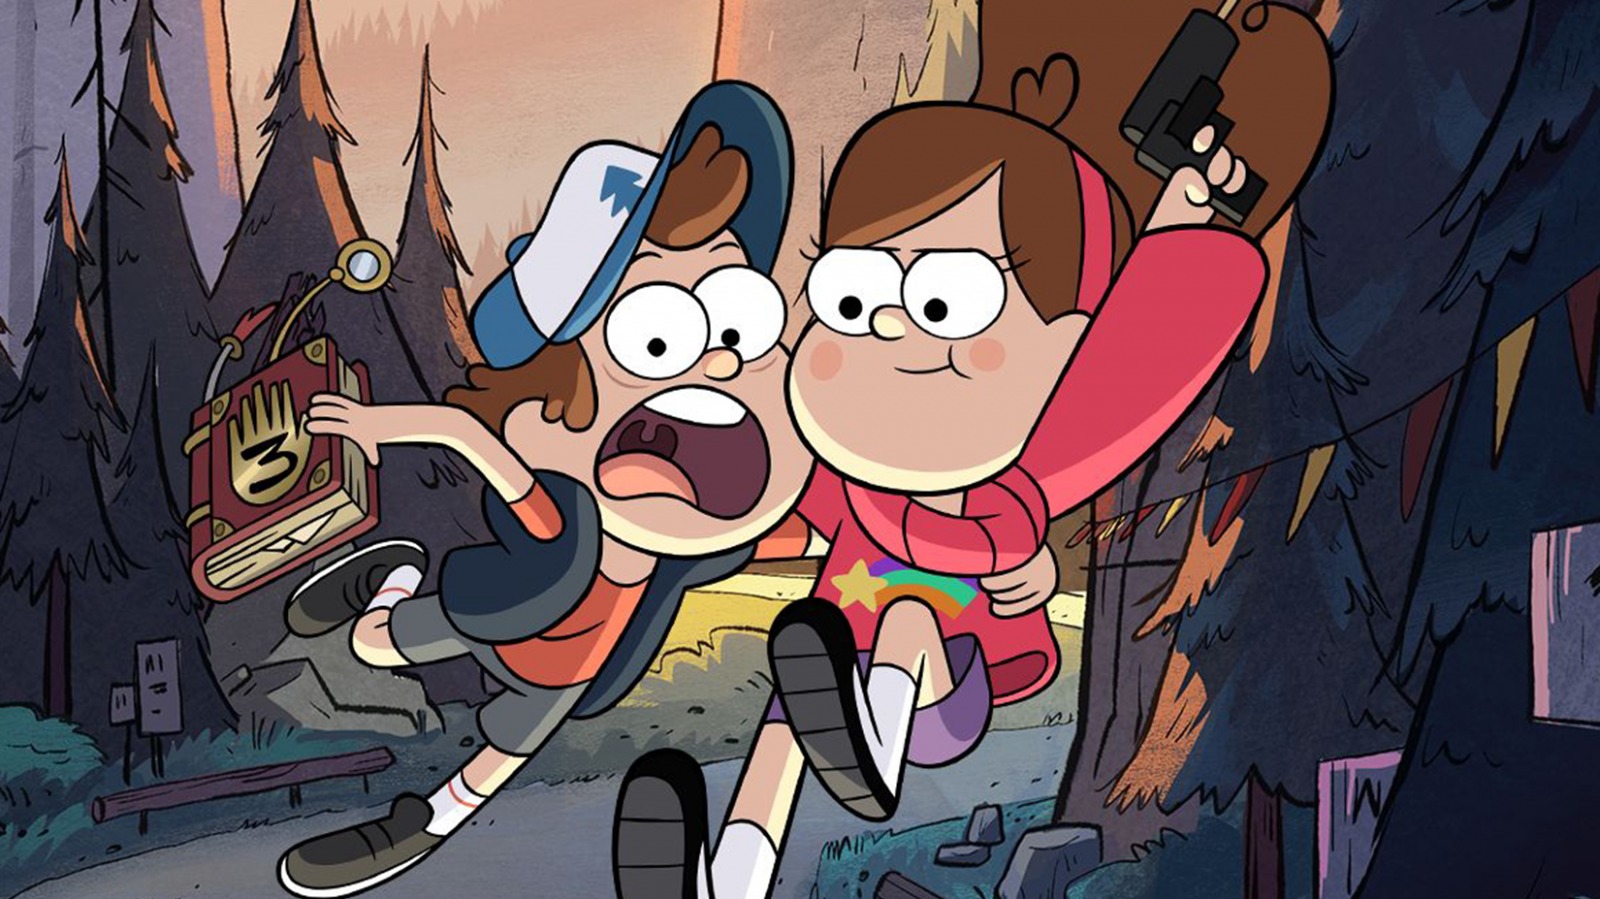 Pin by ZH on gravity fall (With images) | Gravity falls 